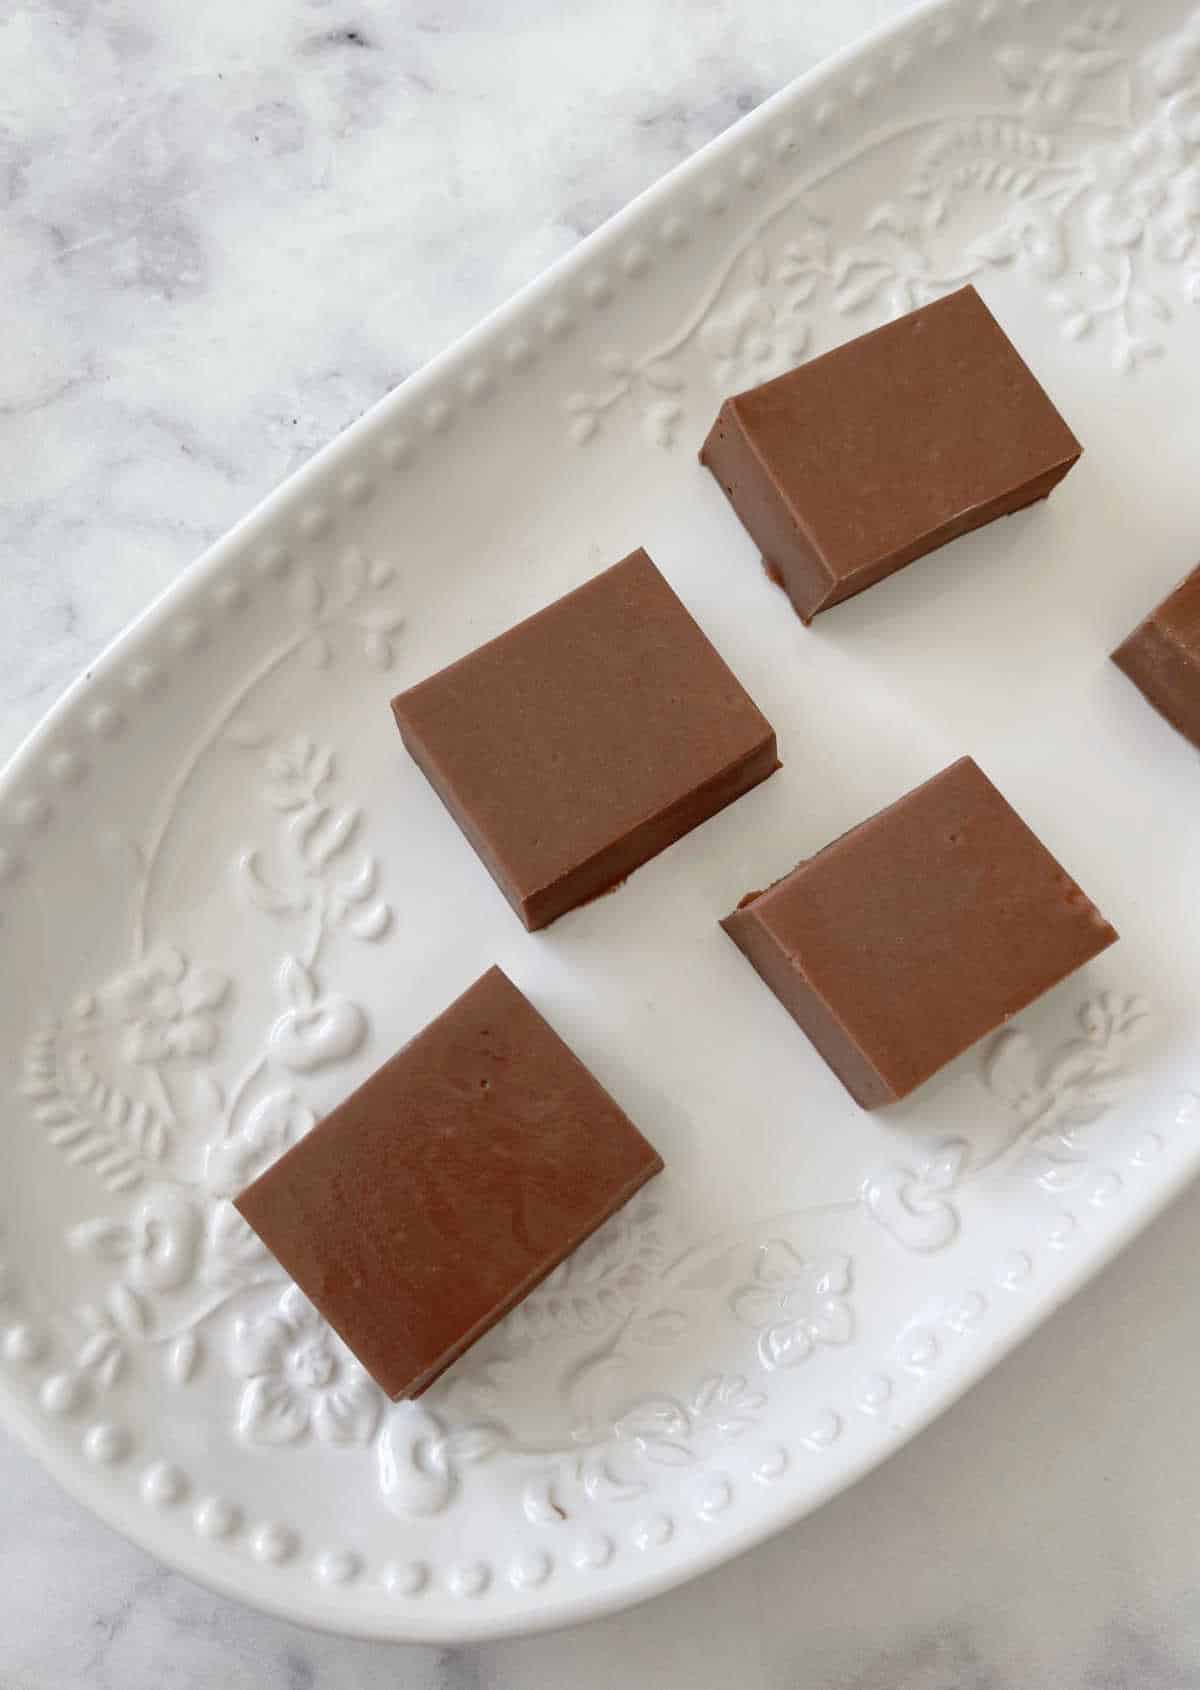 pieces of chocolate fudge on a white decorative serving tray.